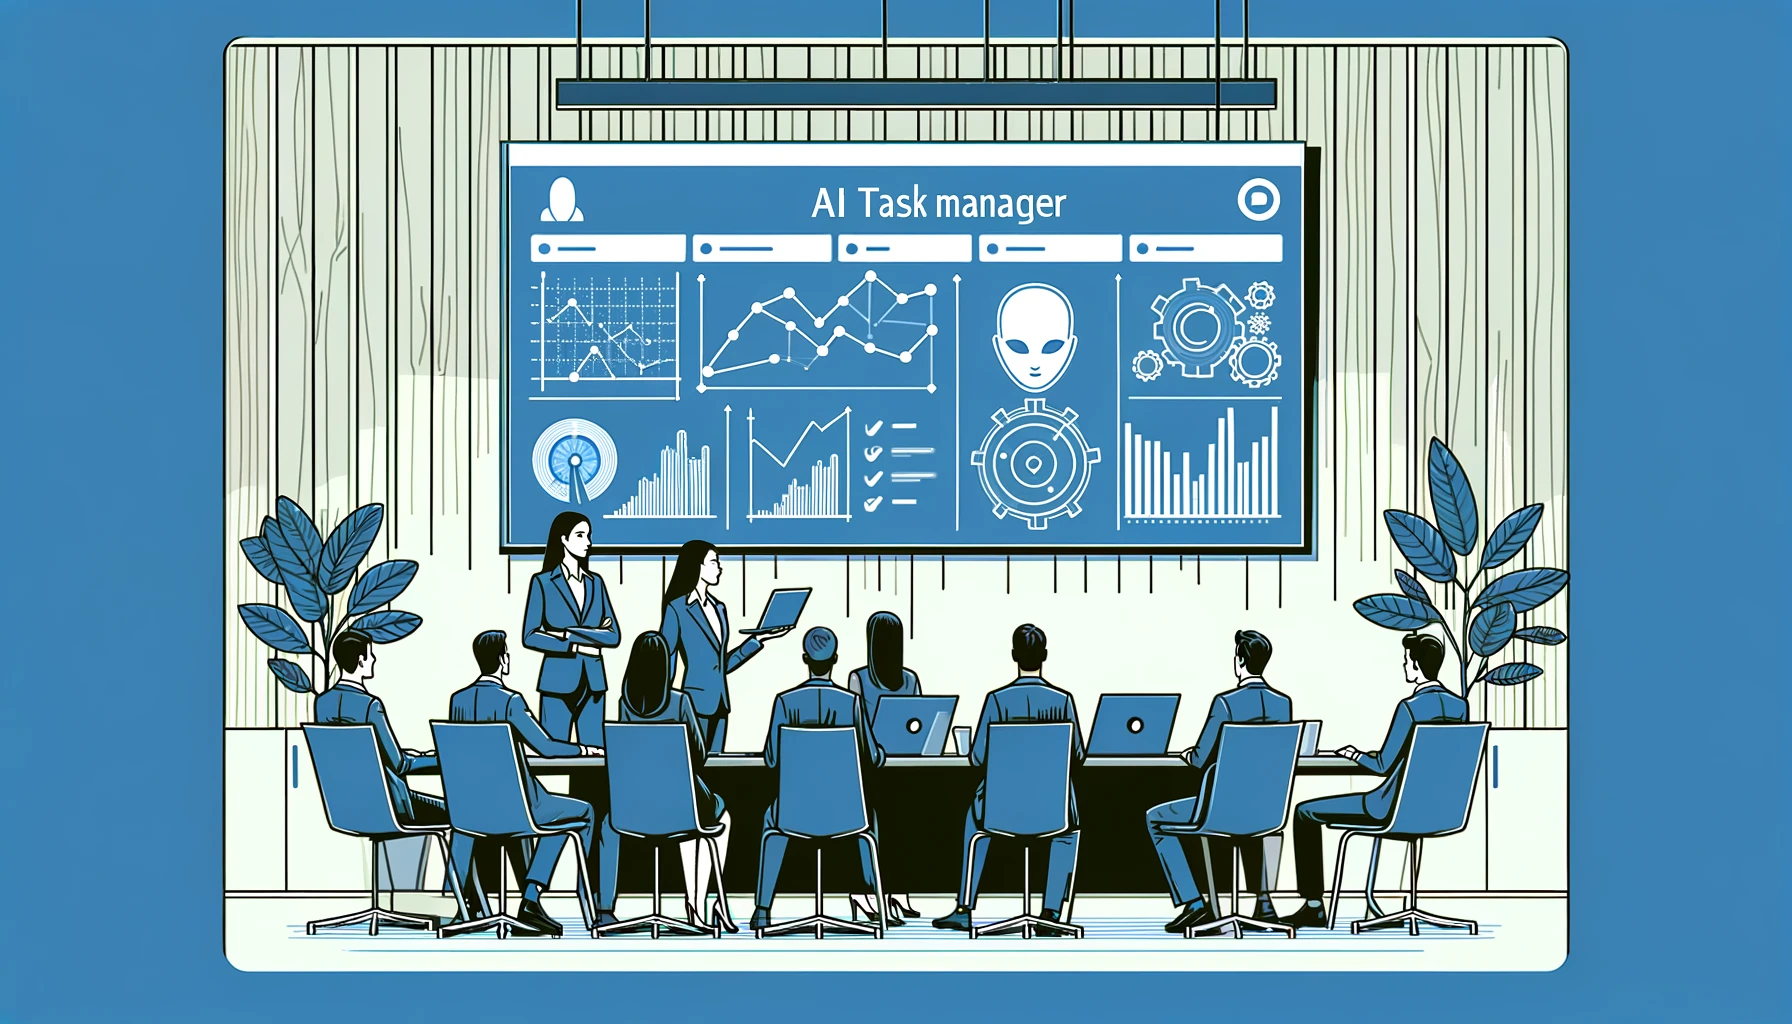 AI Task Manager